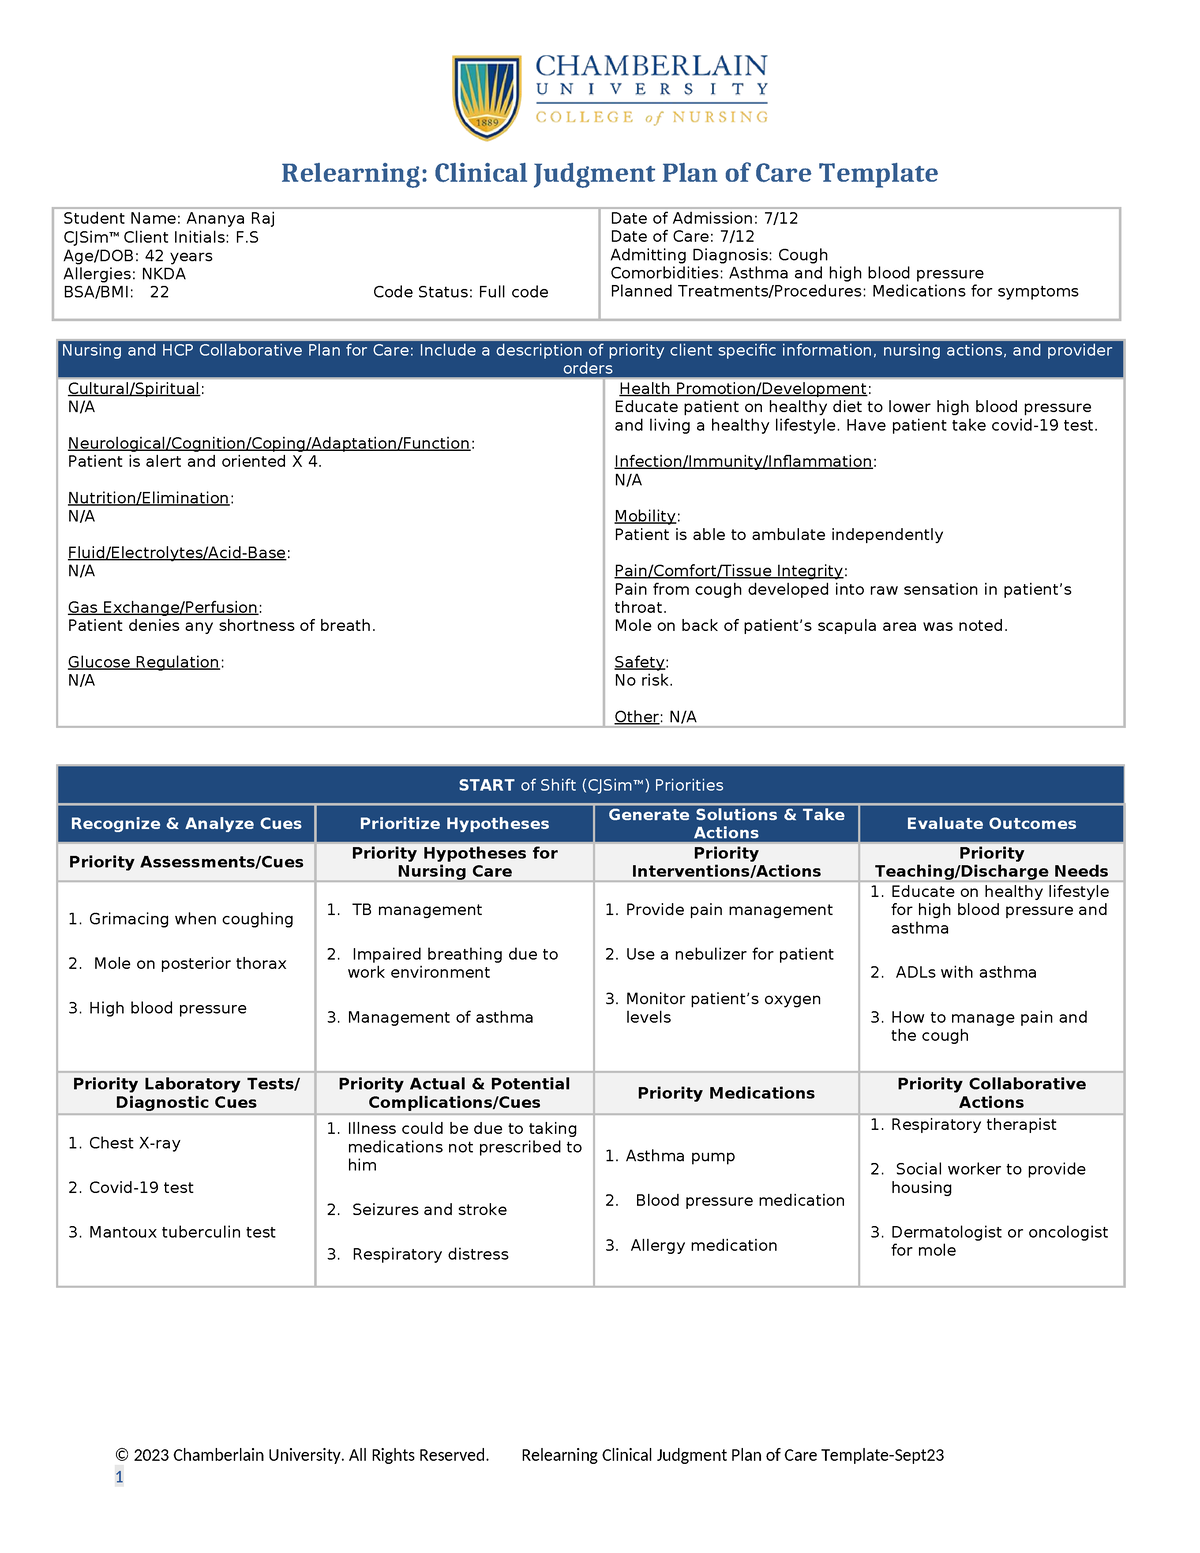 franklin-sanderson-relearning-clinical-judgment-plan-of-care-template